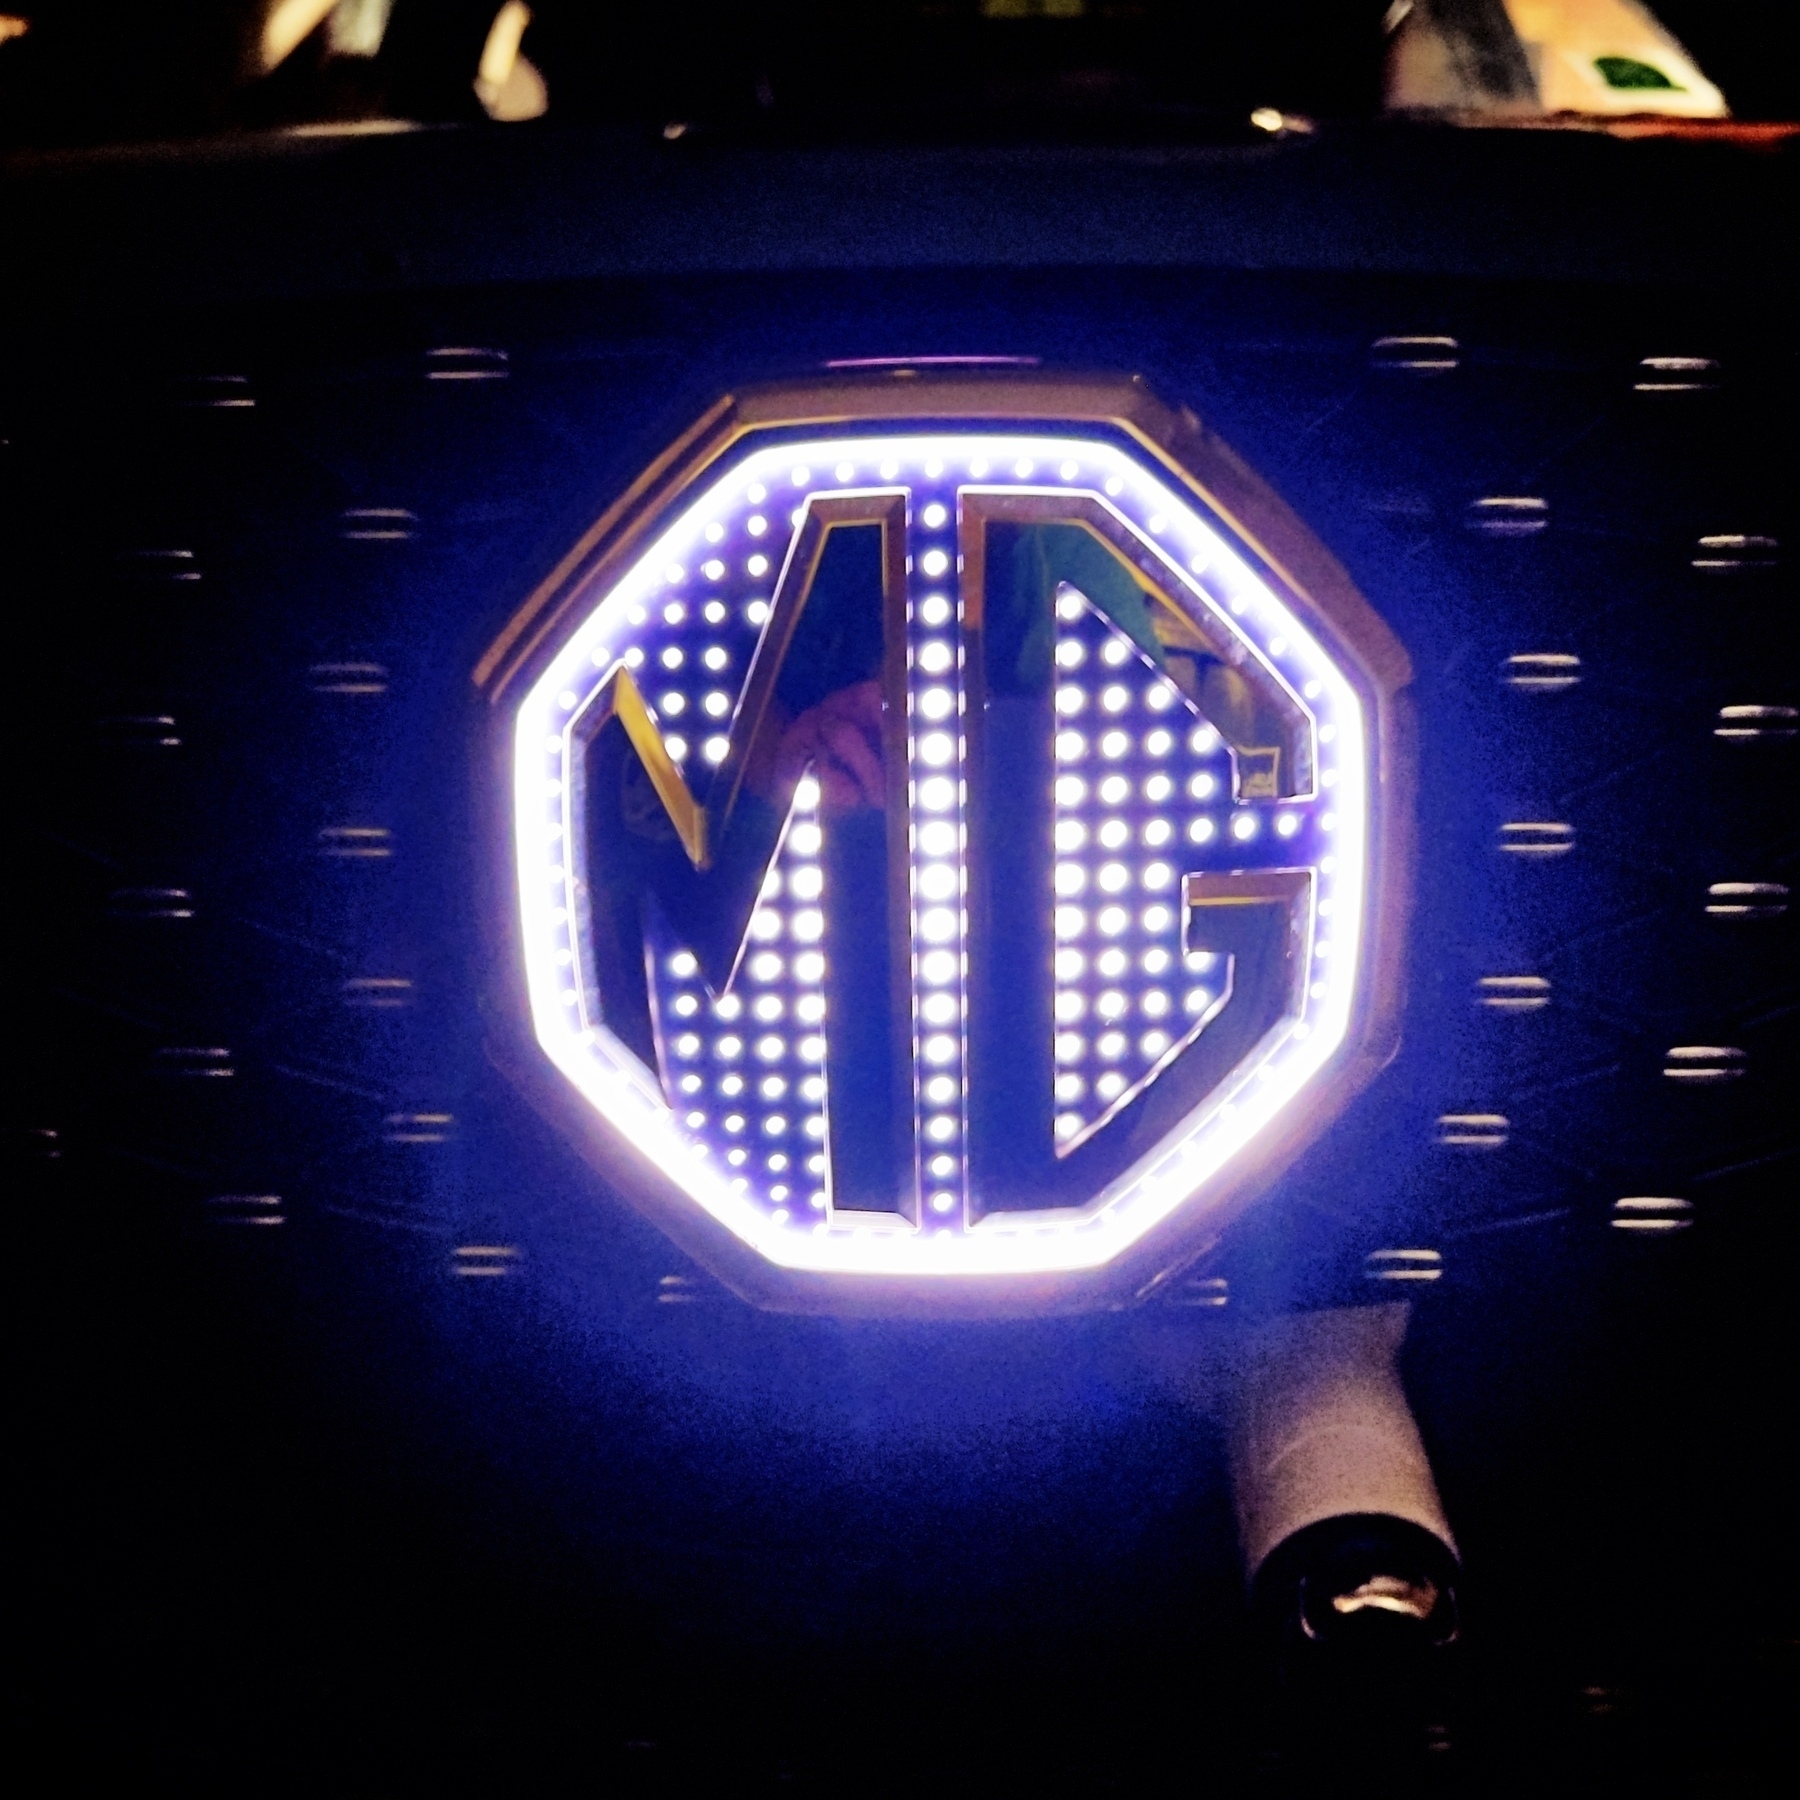 An illuminated MG emblem is prominently displayed on the front of a charging EV, surrounded by a glowing light.